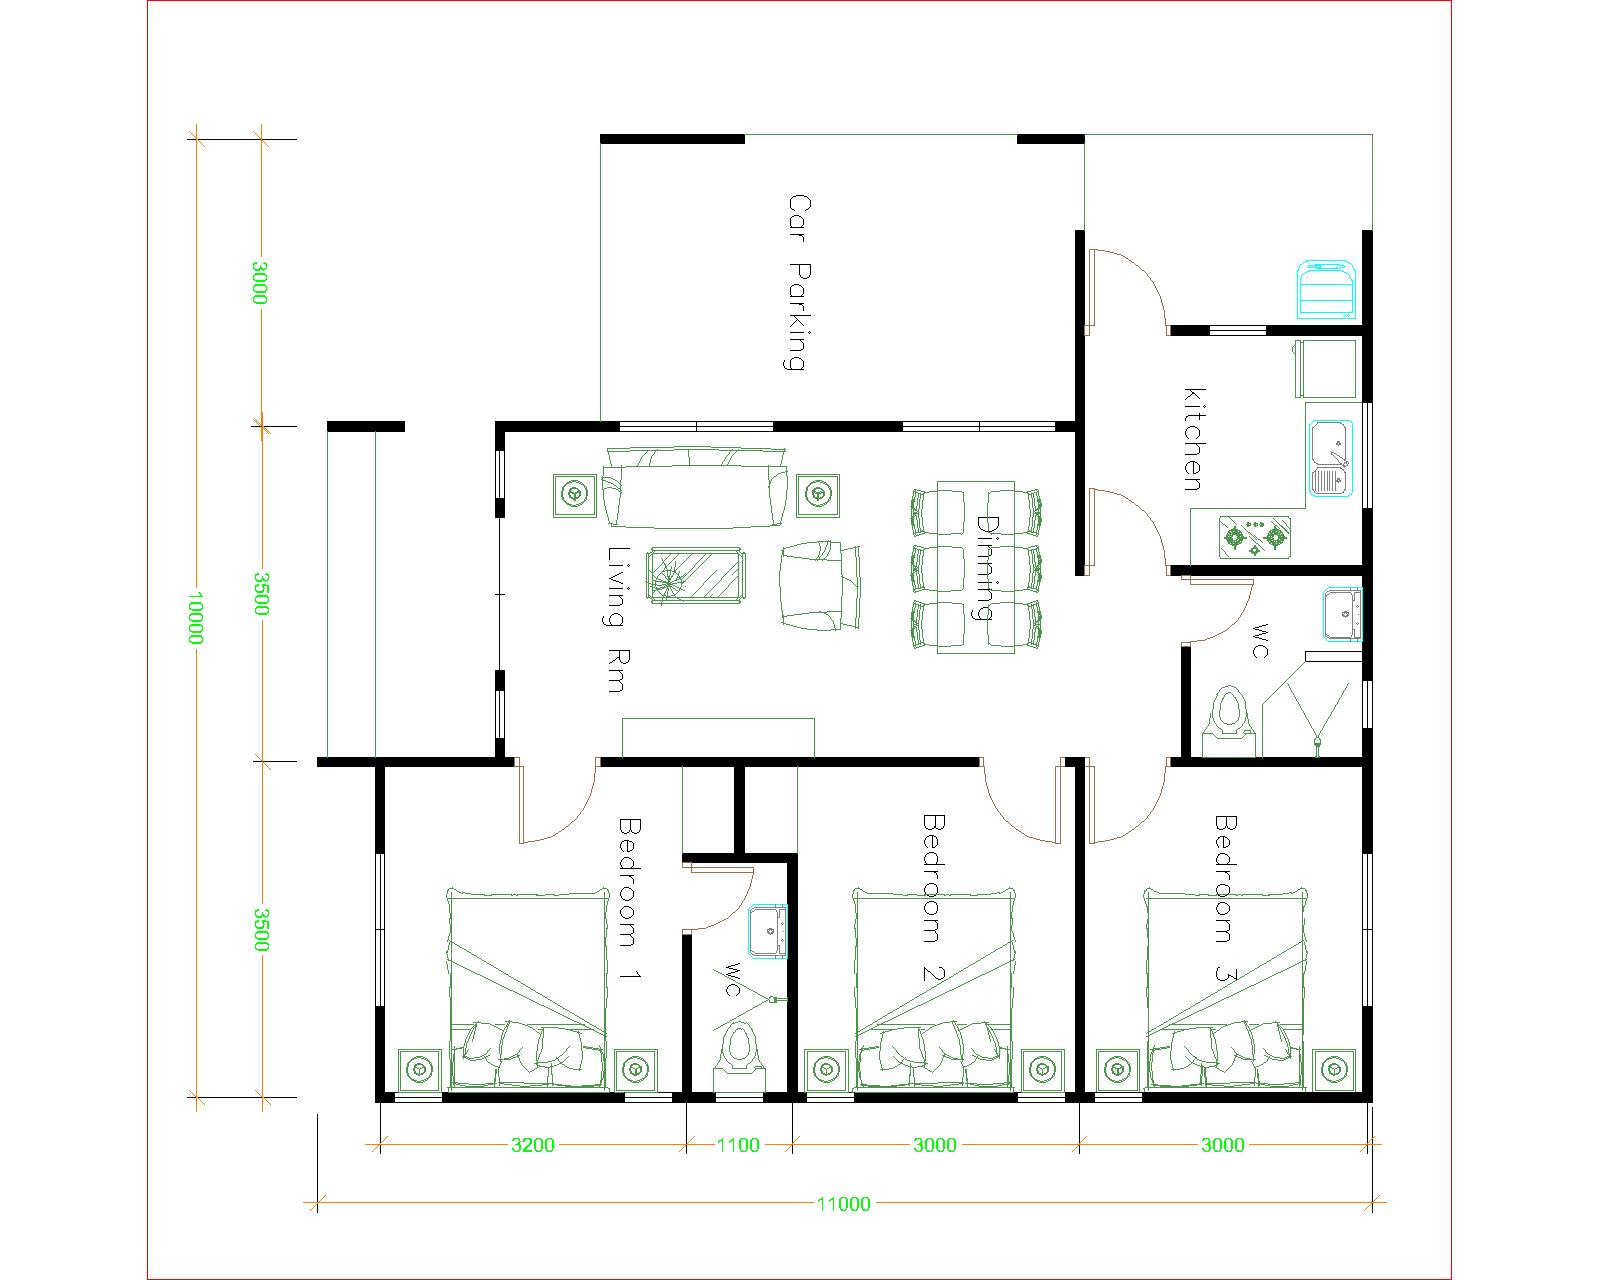 House Plans Design 10x11 with 3 Bedrooms - House Plan Map